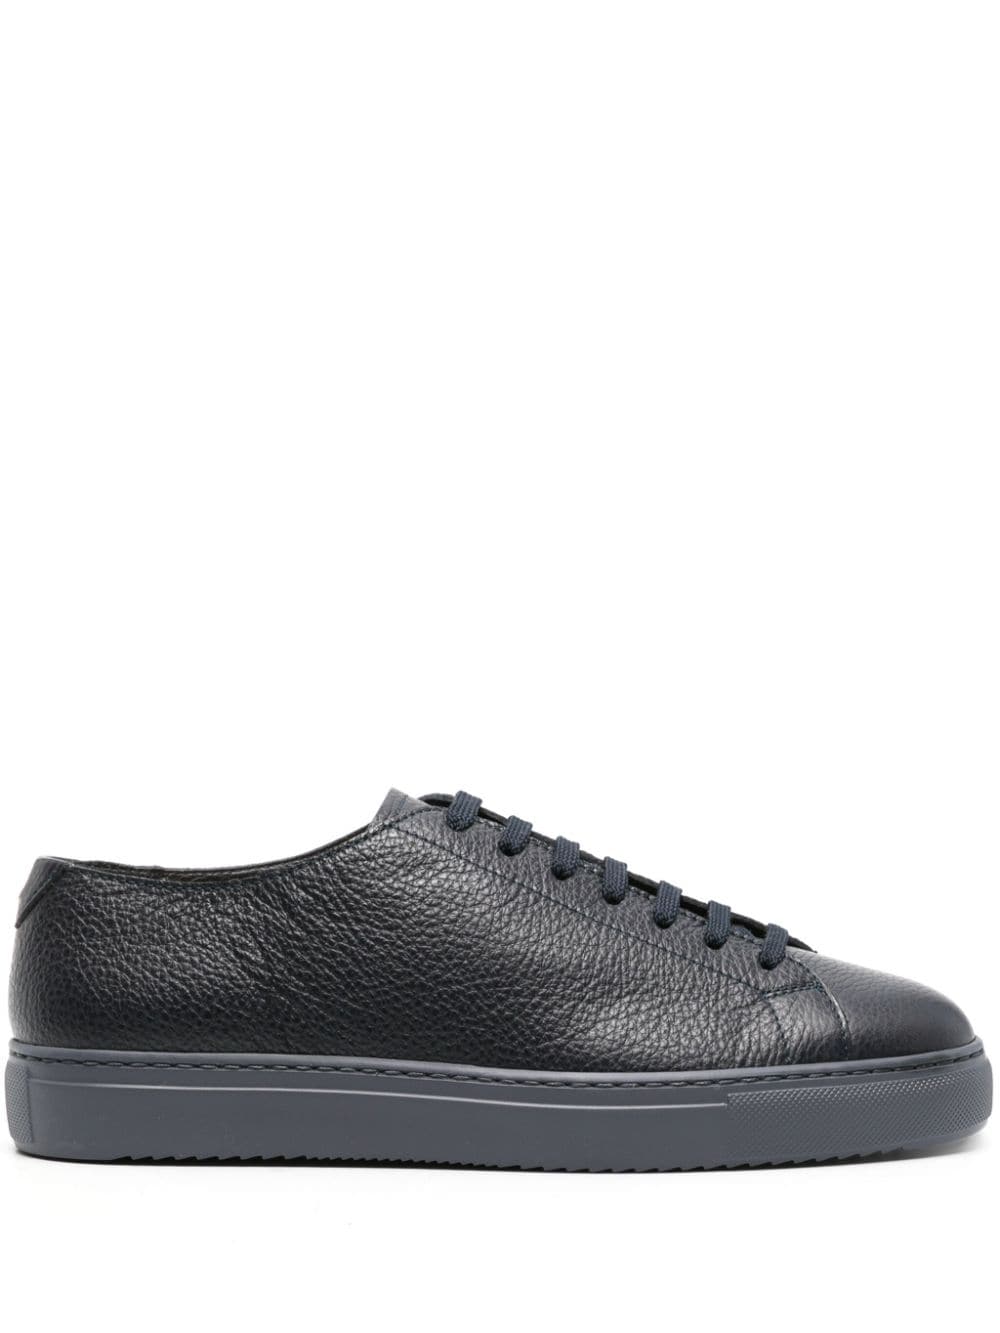 Doucal's lace-up leather sneakers - Blue von Doucal's